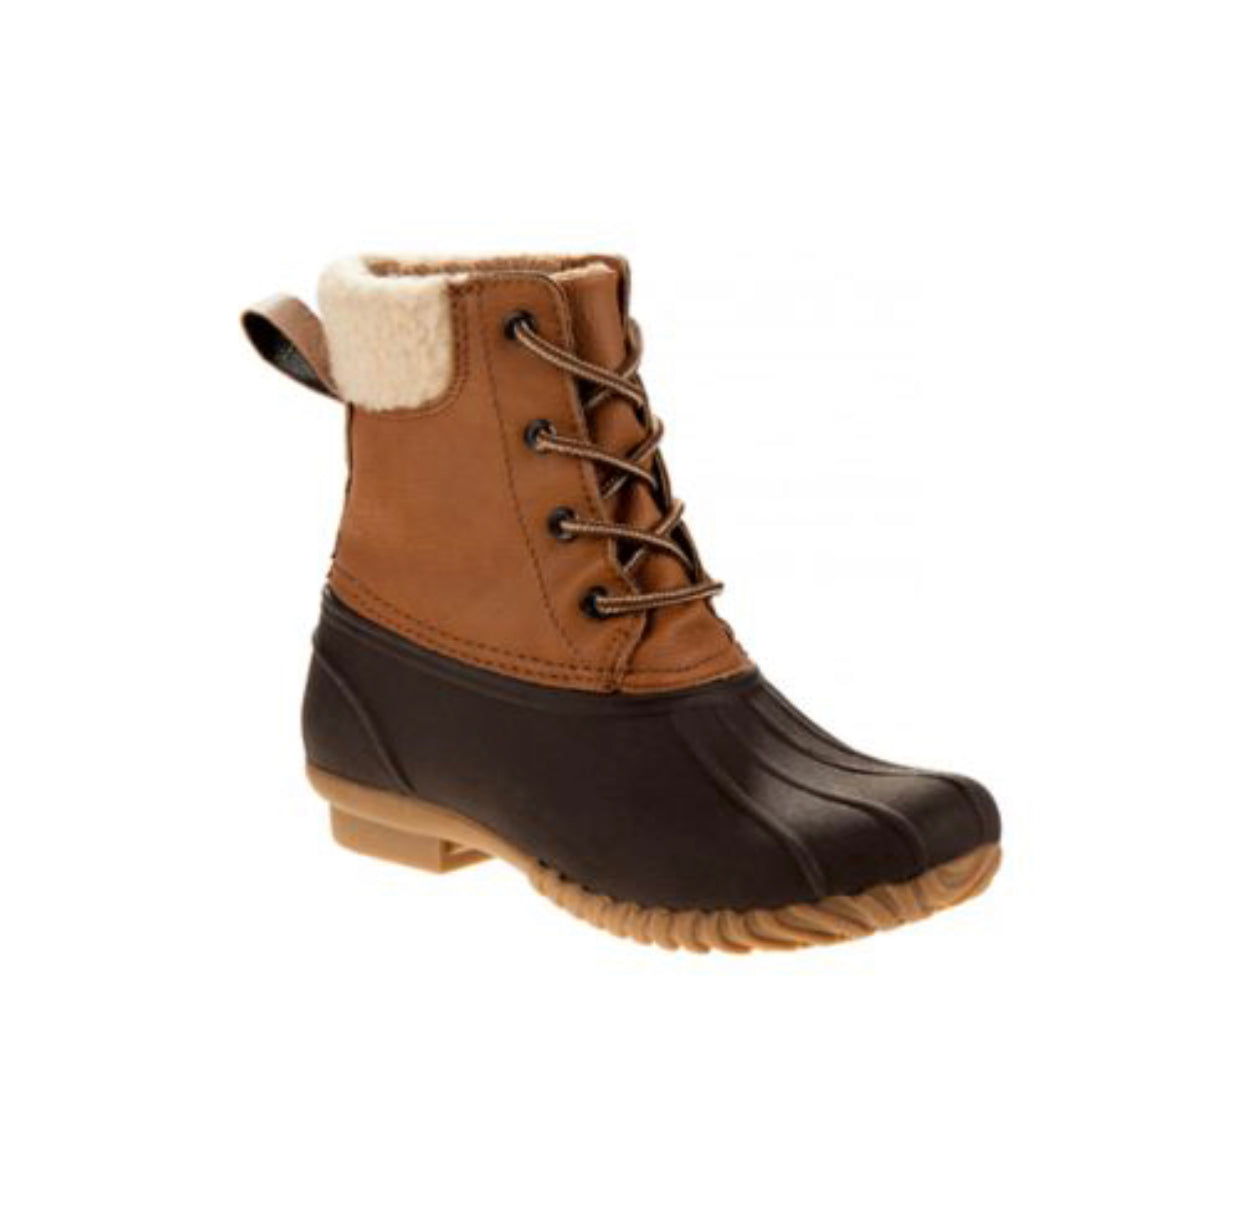 Josmo Duck Boots Tall Brown